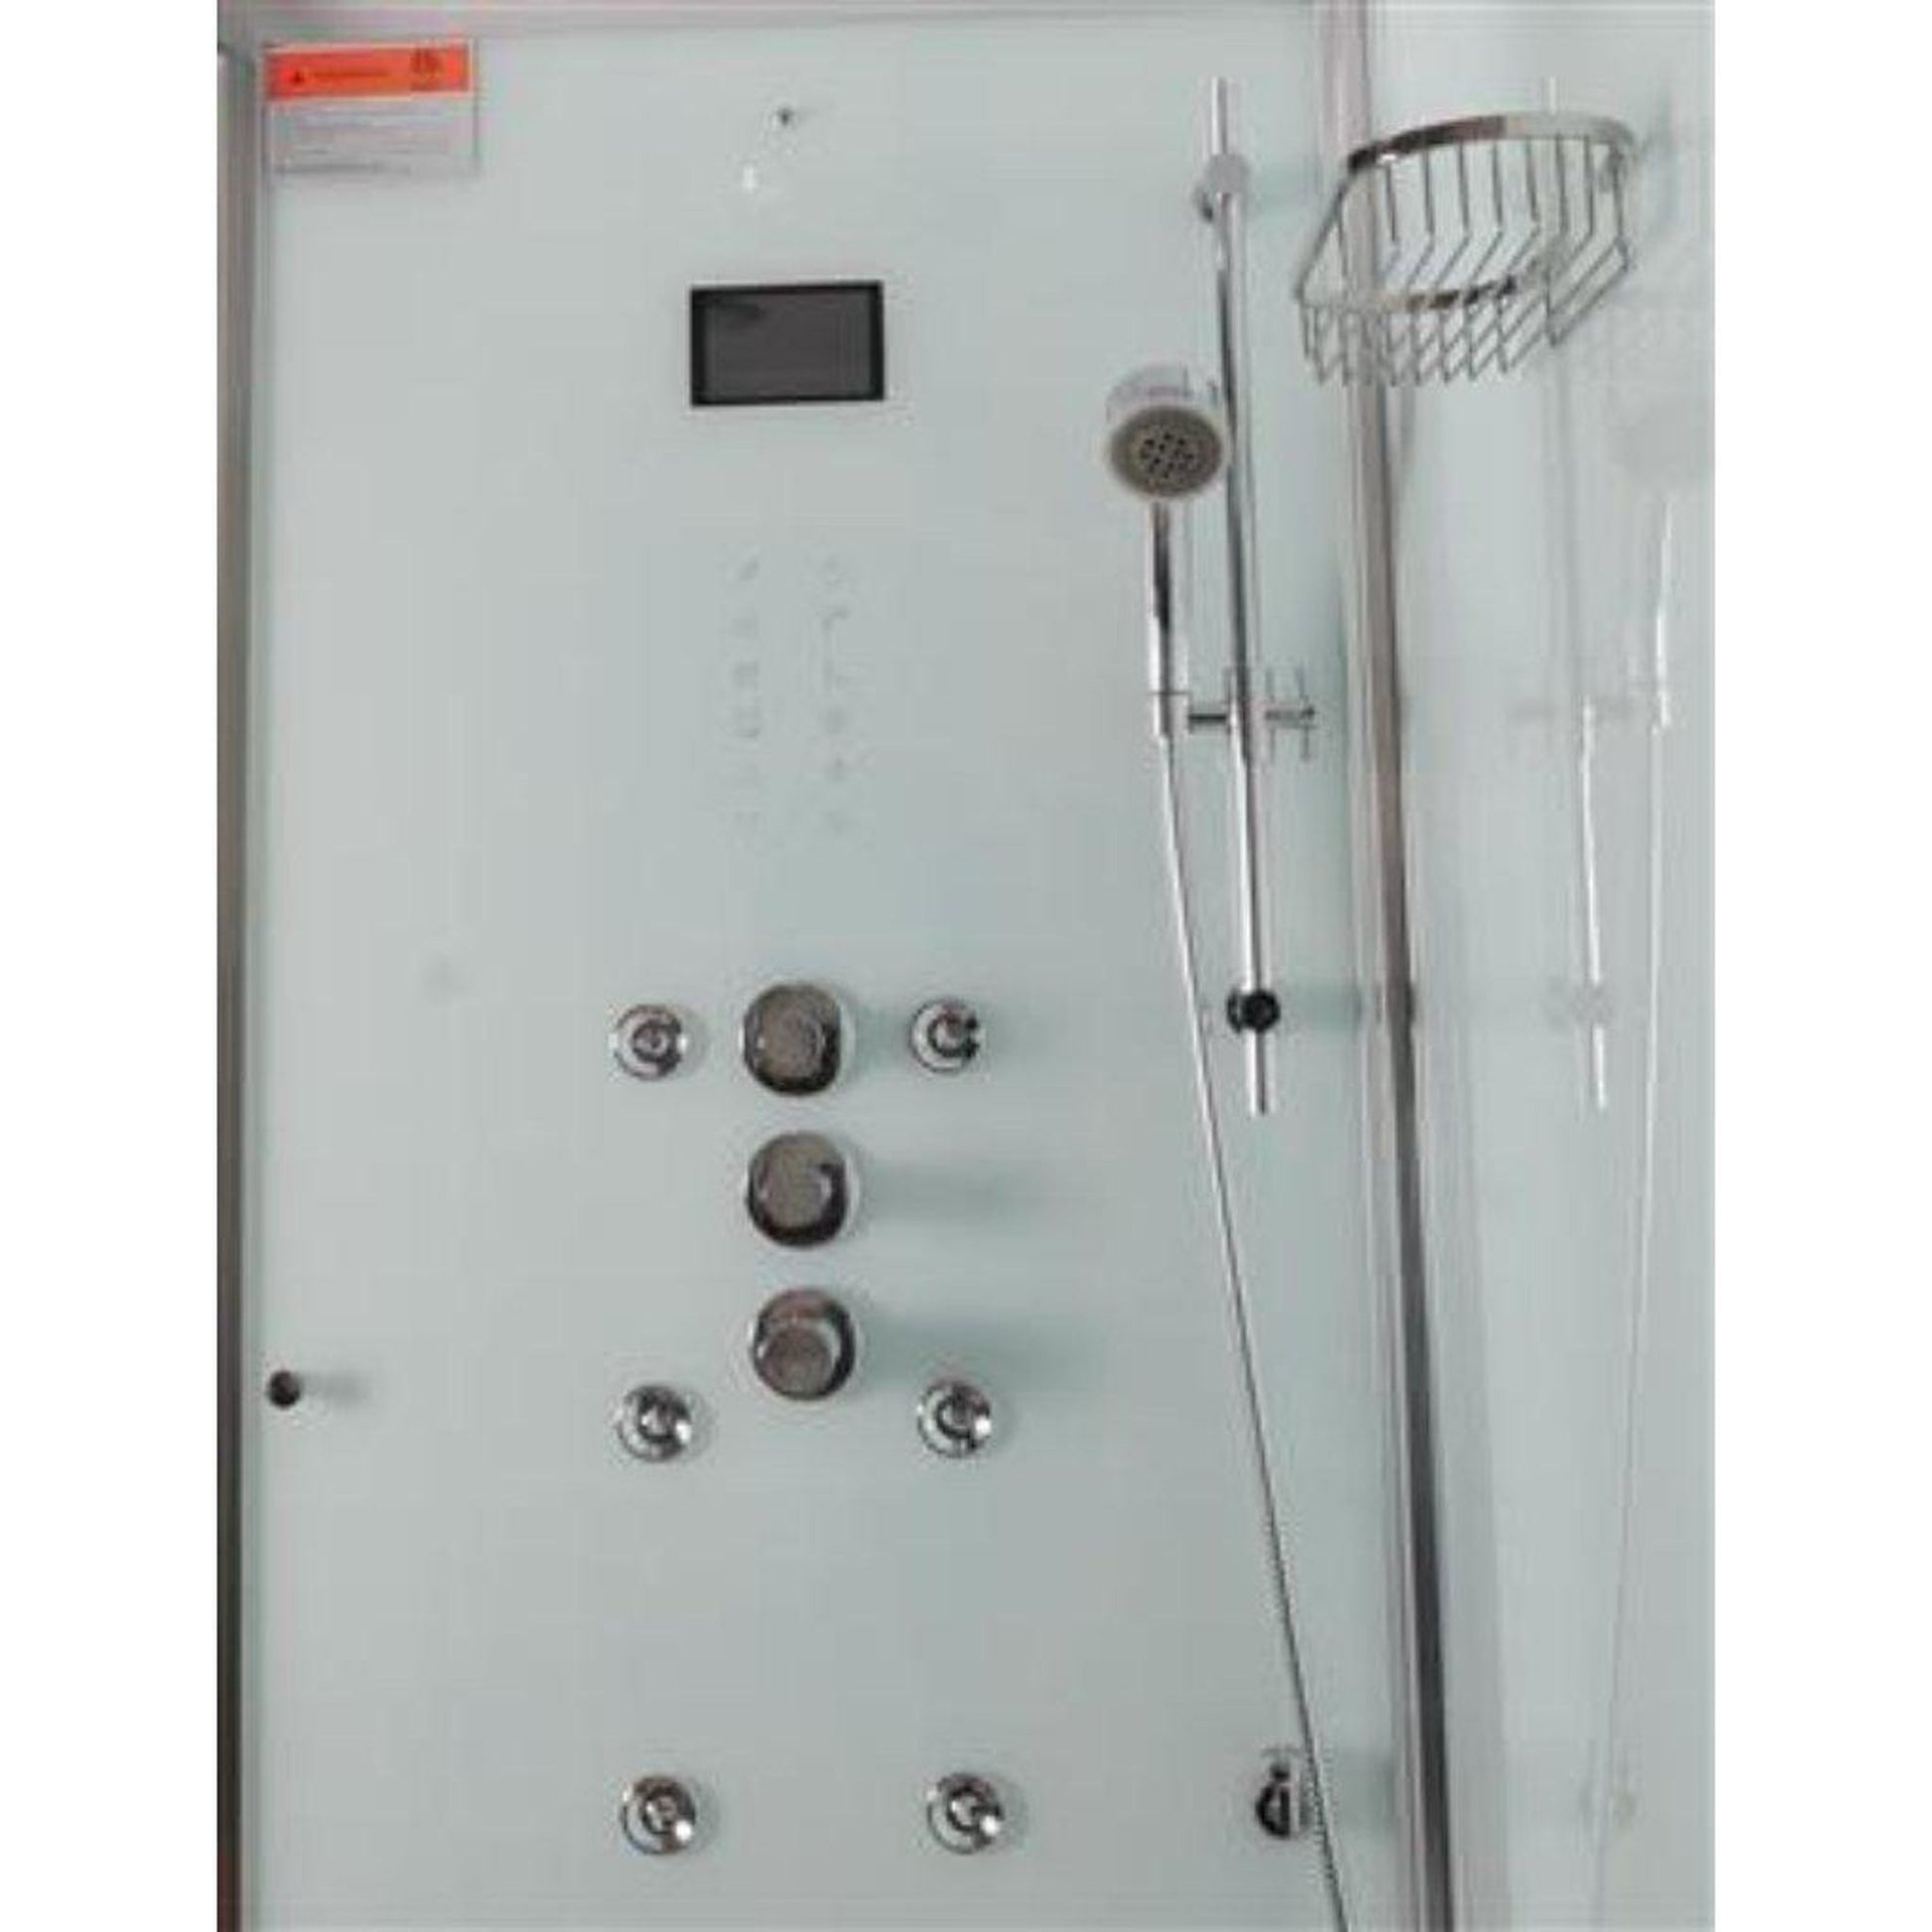 Athena 59" x 36" x 89" One Person Framed Rectangle Left Handed White Colored Steam Shower With Hinged Door & 6 Massage Jets